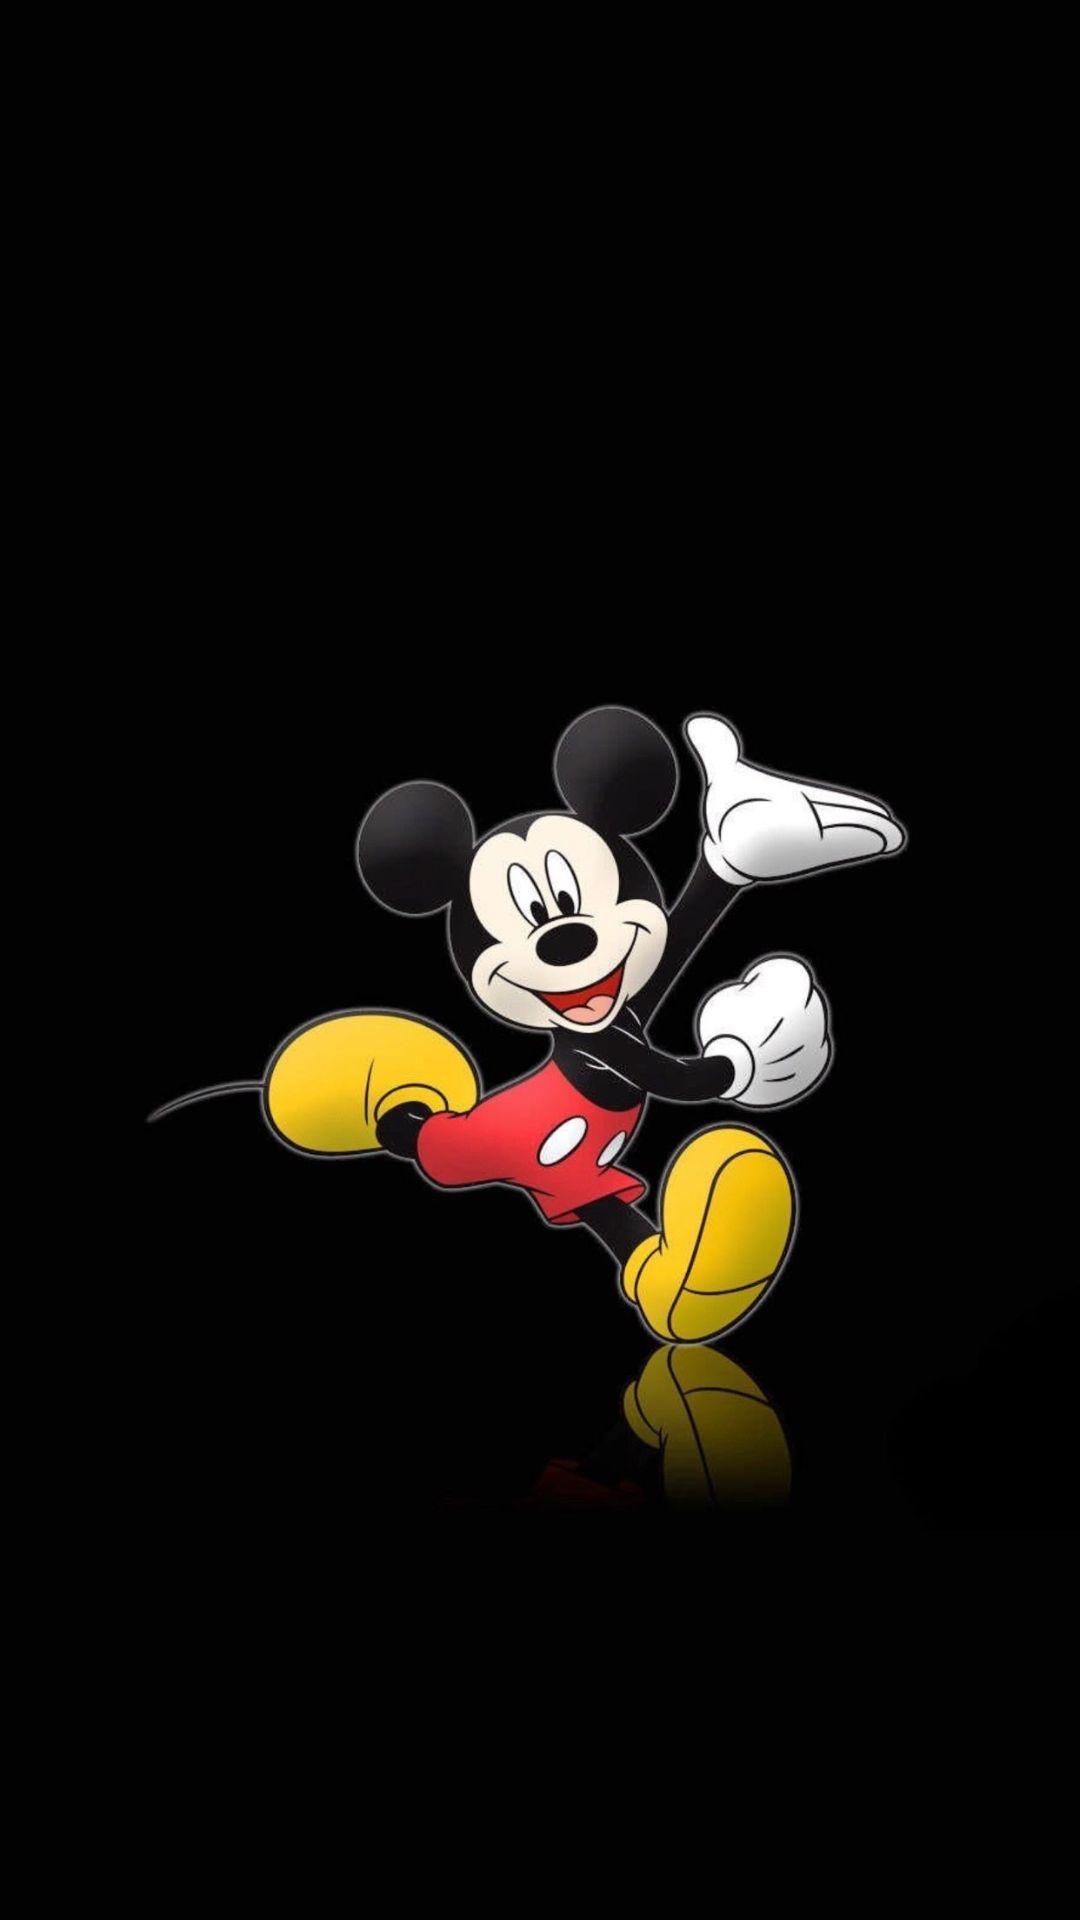 Mickey Mouse wallpapers for desktop, iPhone, PC, and mobile, Versatile options, 1080x1920 Full HD Handy